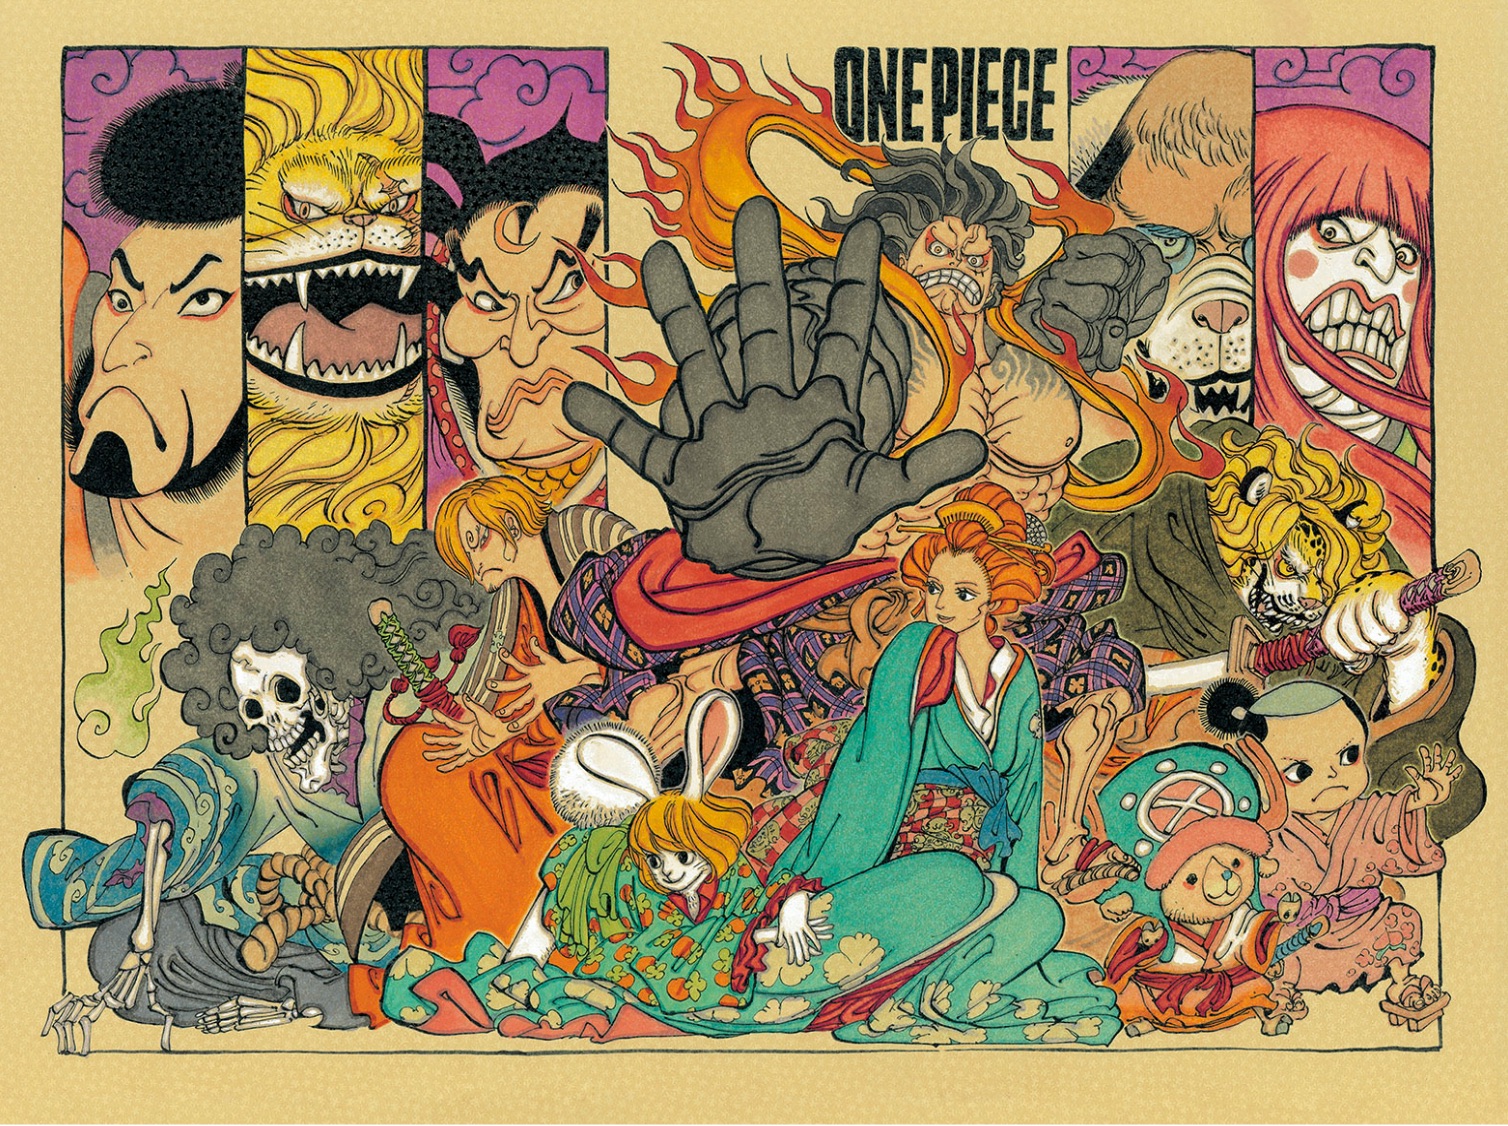 One Piece TV SP 6: Episode Of Luffy – Adventure On Hand Island (2012)  [REVIEW] – Wise Cafe (International)